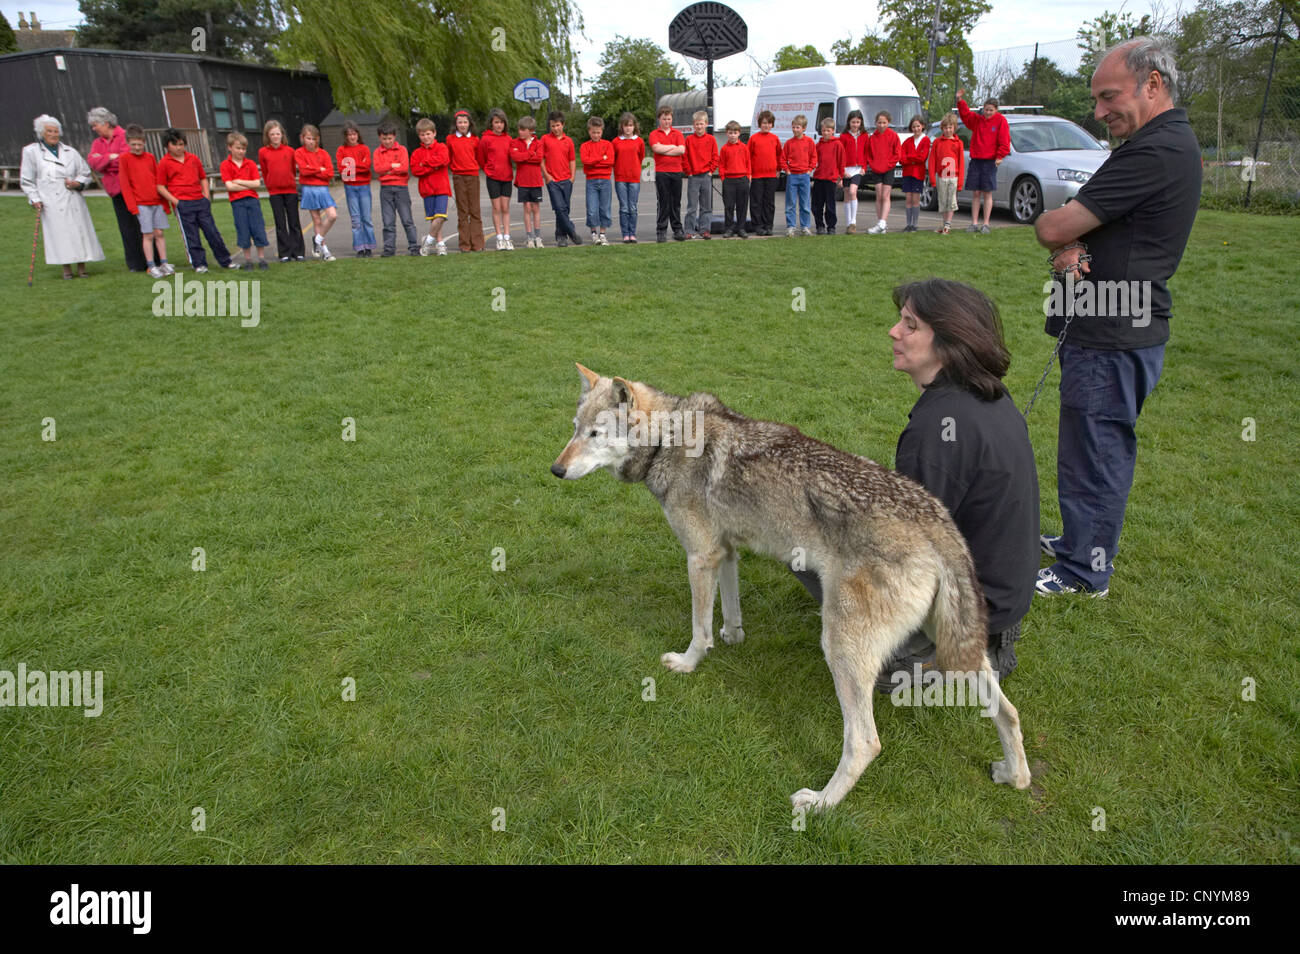 European gray wolf (Canis lupus lupus), visit of two tame animals from the UK Wolf Conservation Trust, Oxon, at a basic school, United Kingdom, England Stock Photo